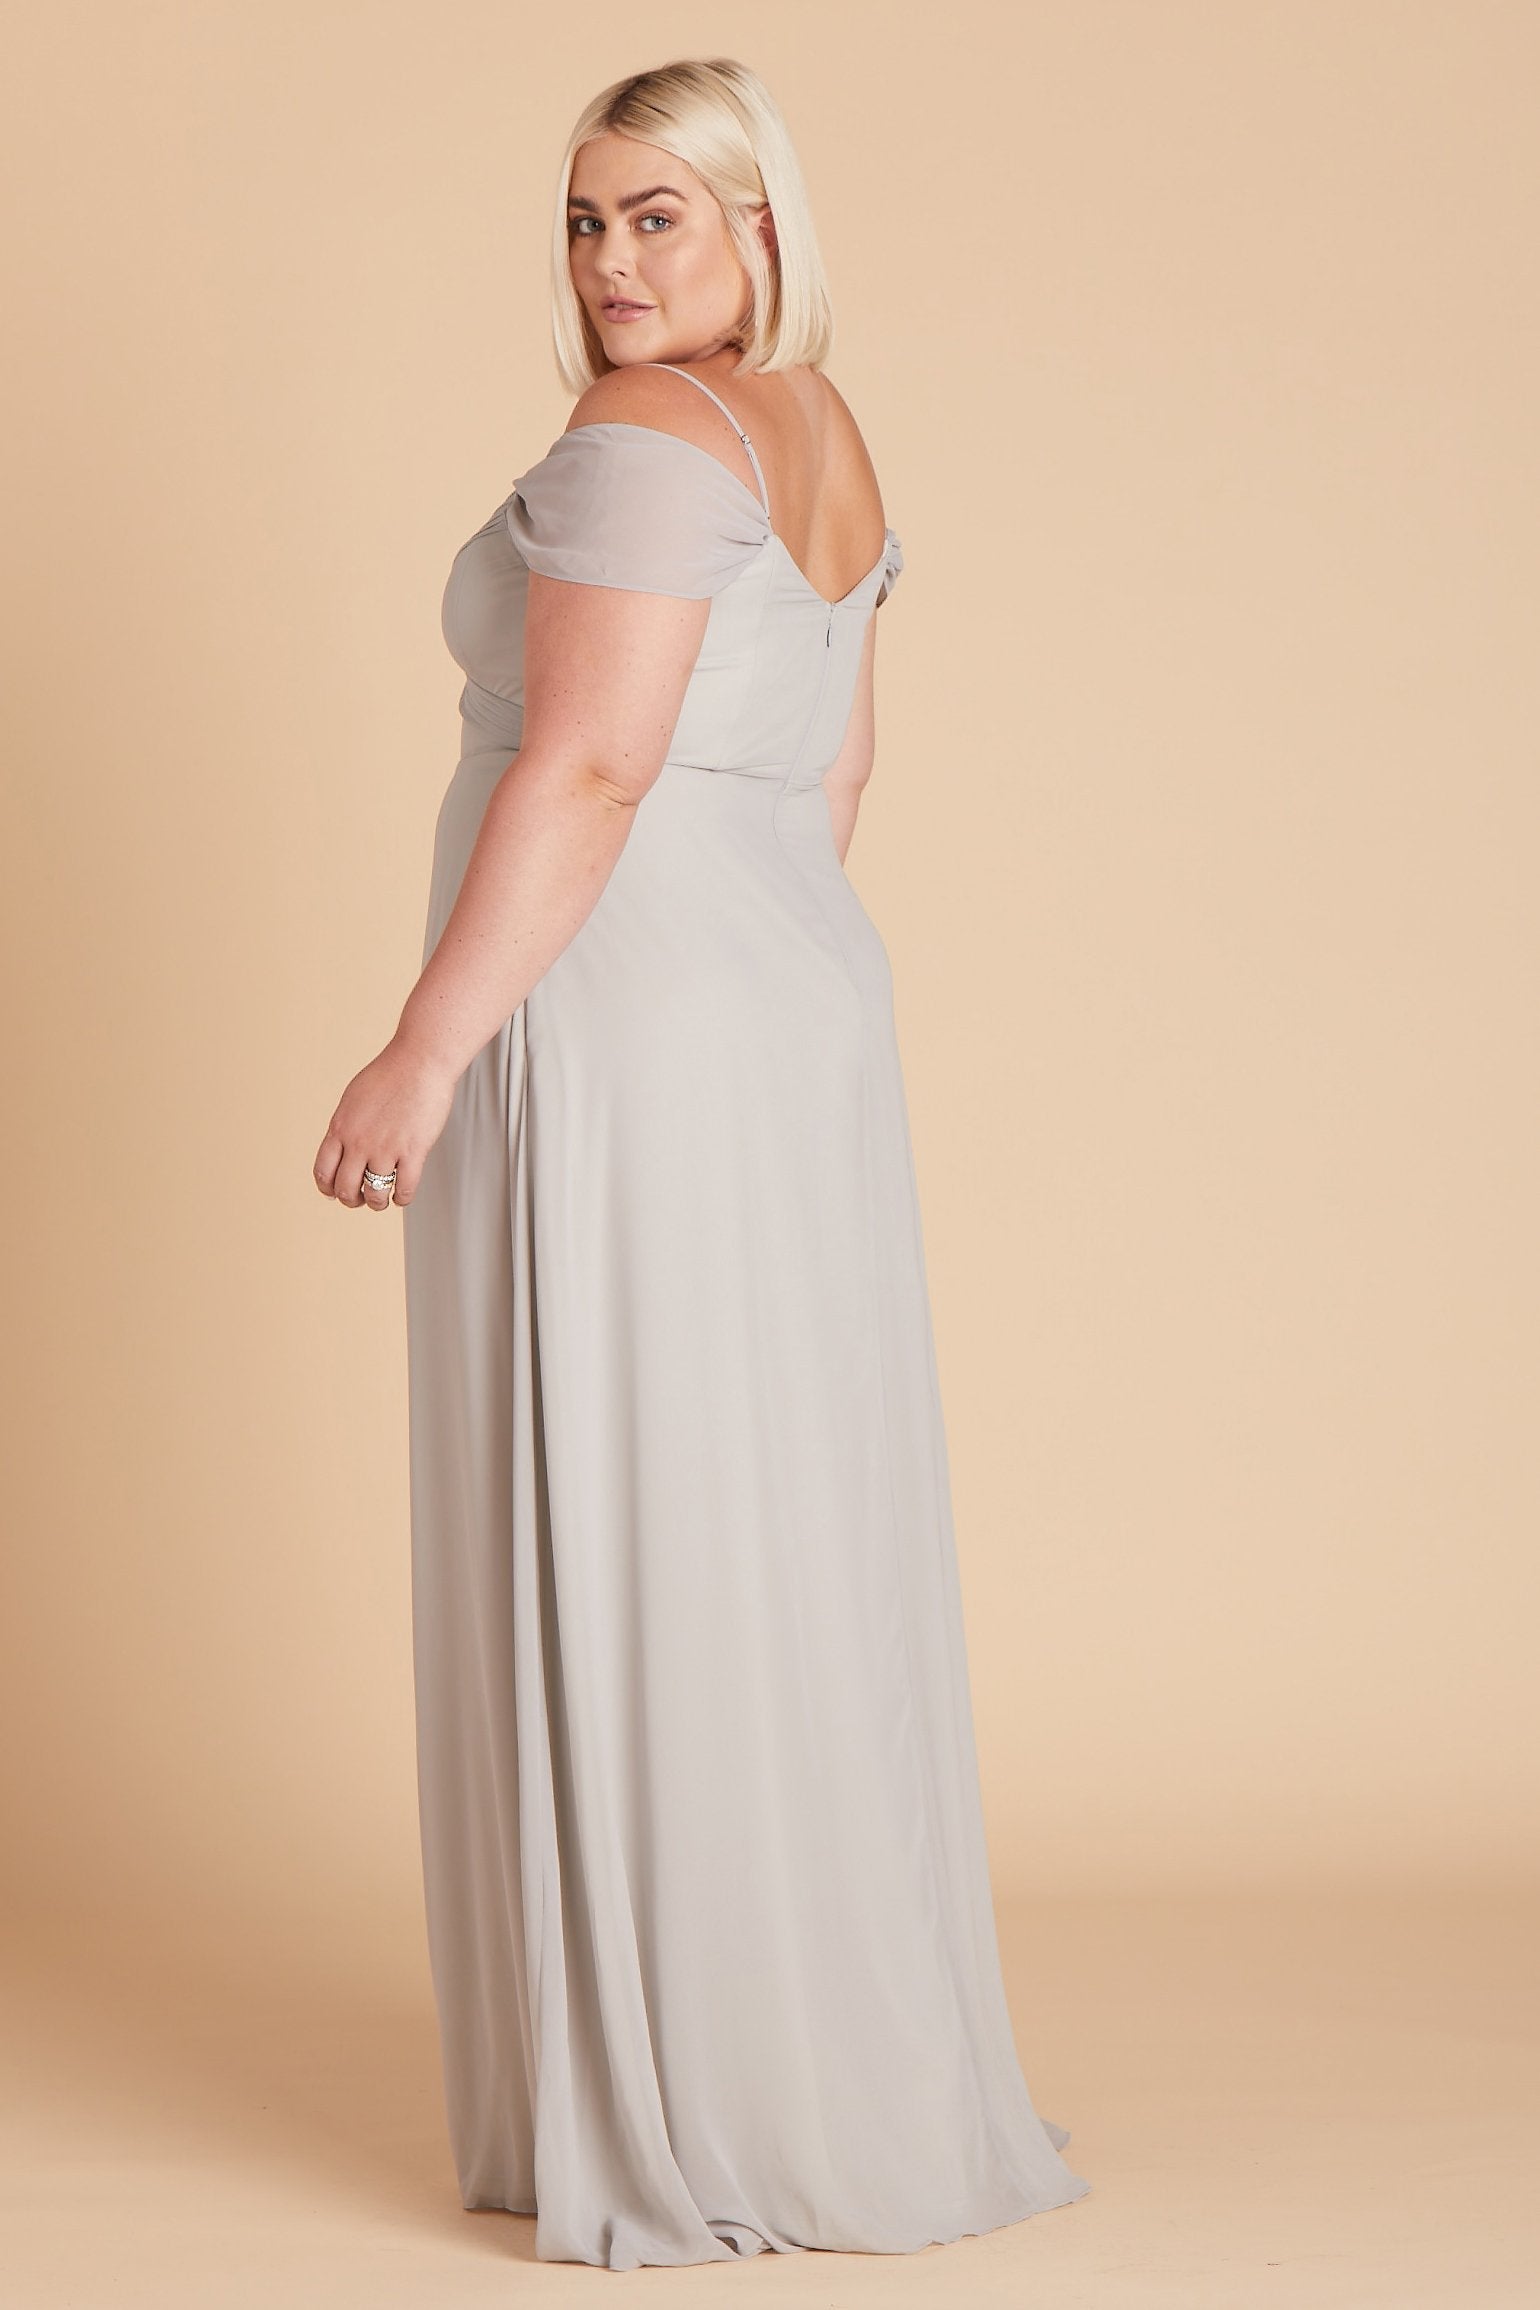 Spence convertible plus size bridesmaid dress in silver chiffon by Birdy Grey, side view